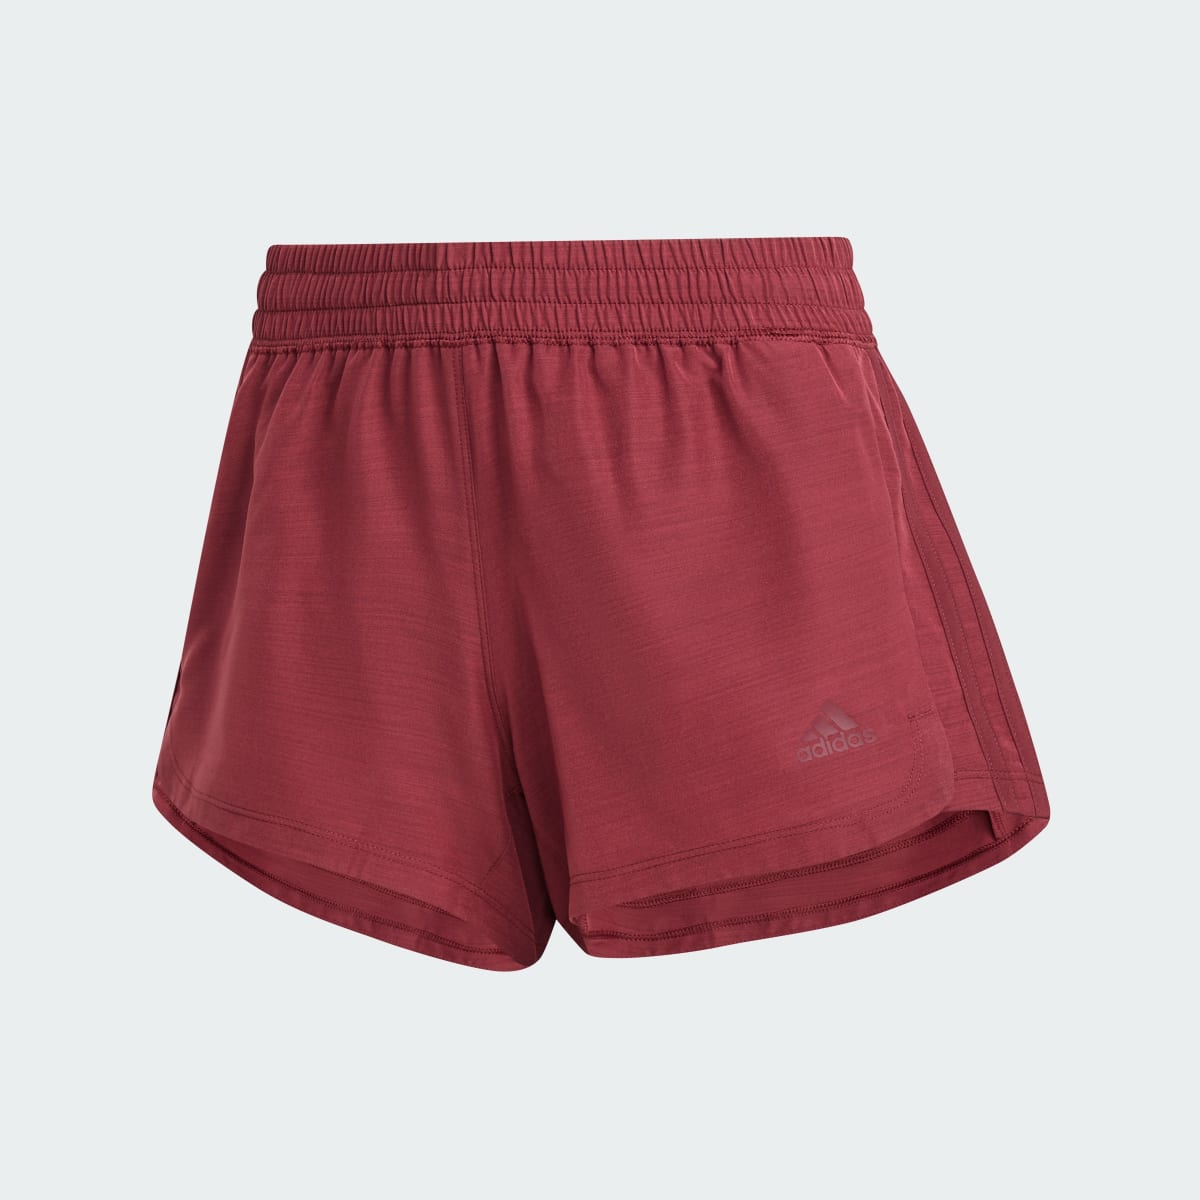 Adidas Pacer 3-Stripes Woven Heather Shorts. 4